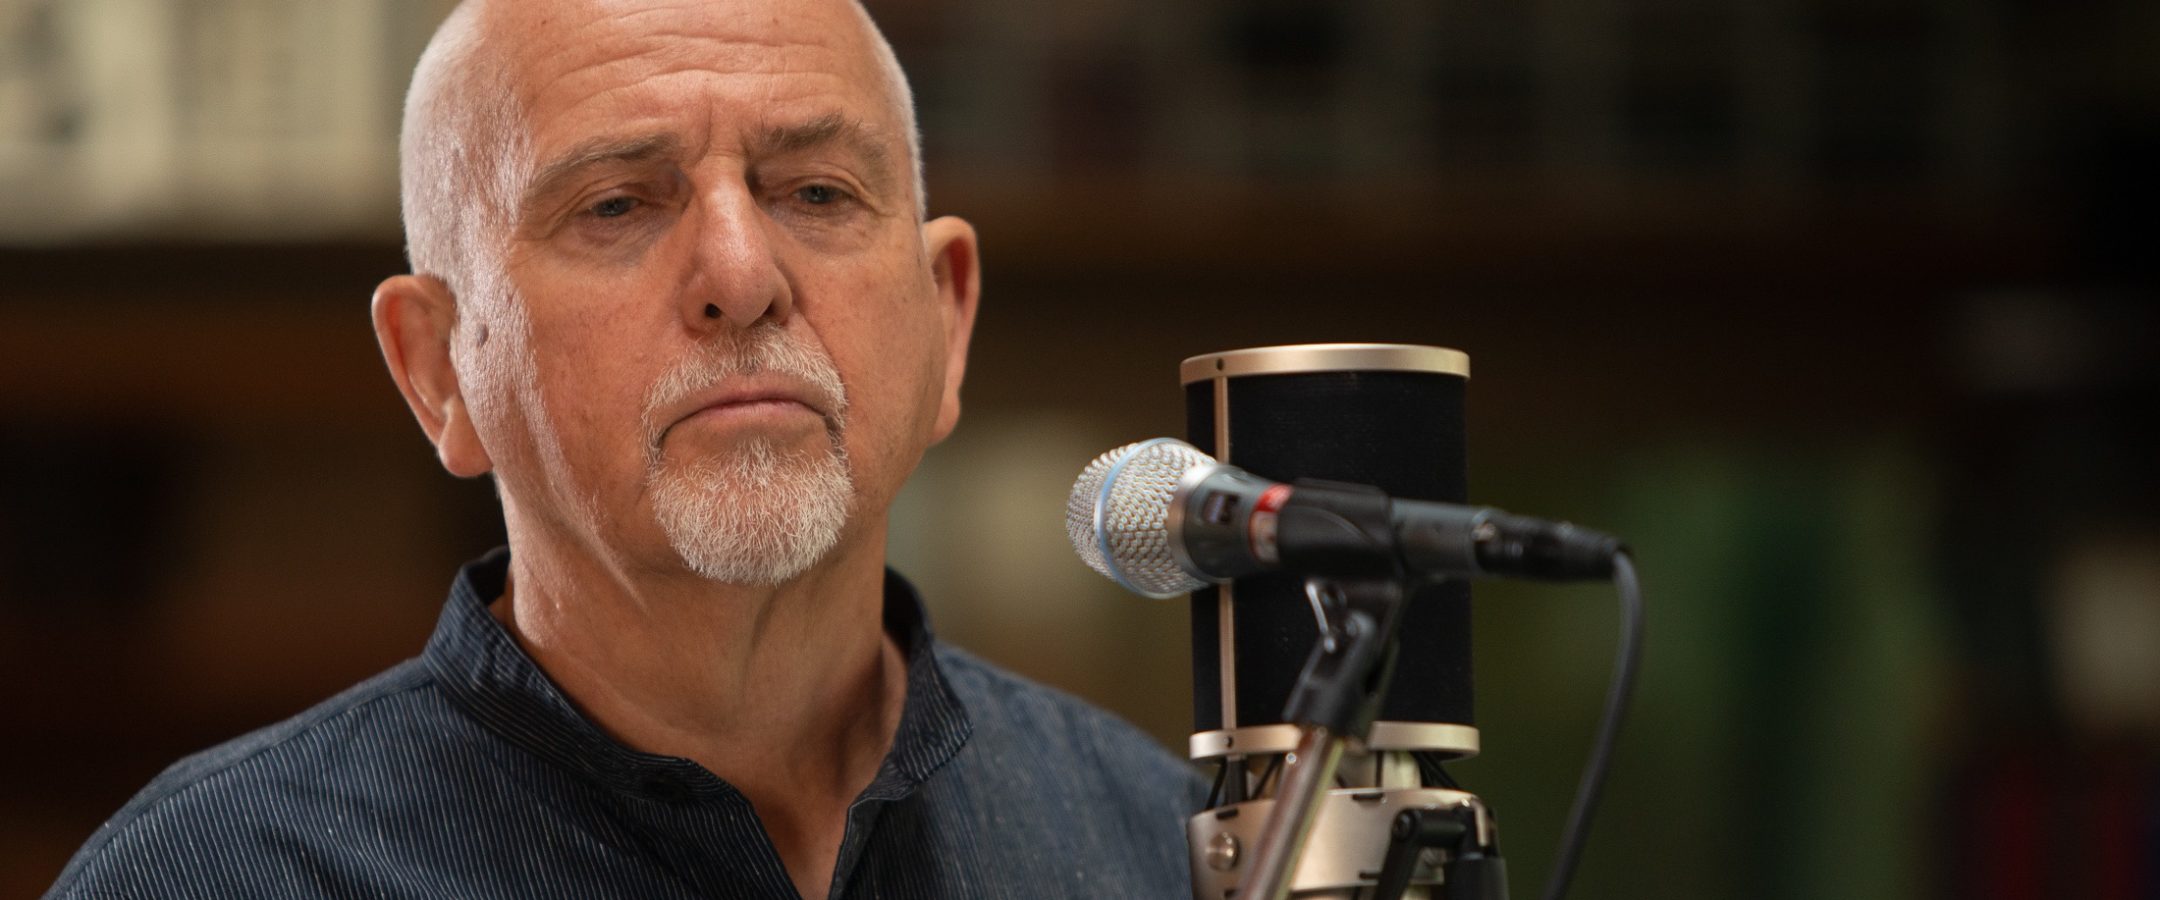 Peter Gabriel Set to Release New Album, His First in 20 Years, Tour in 2023